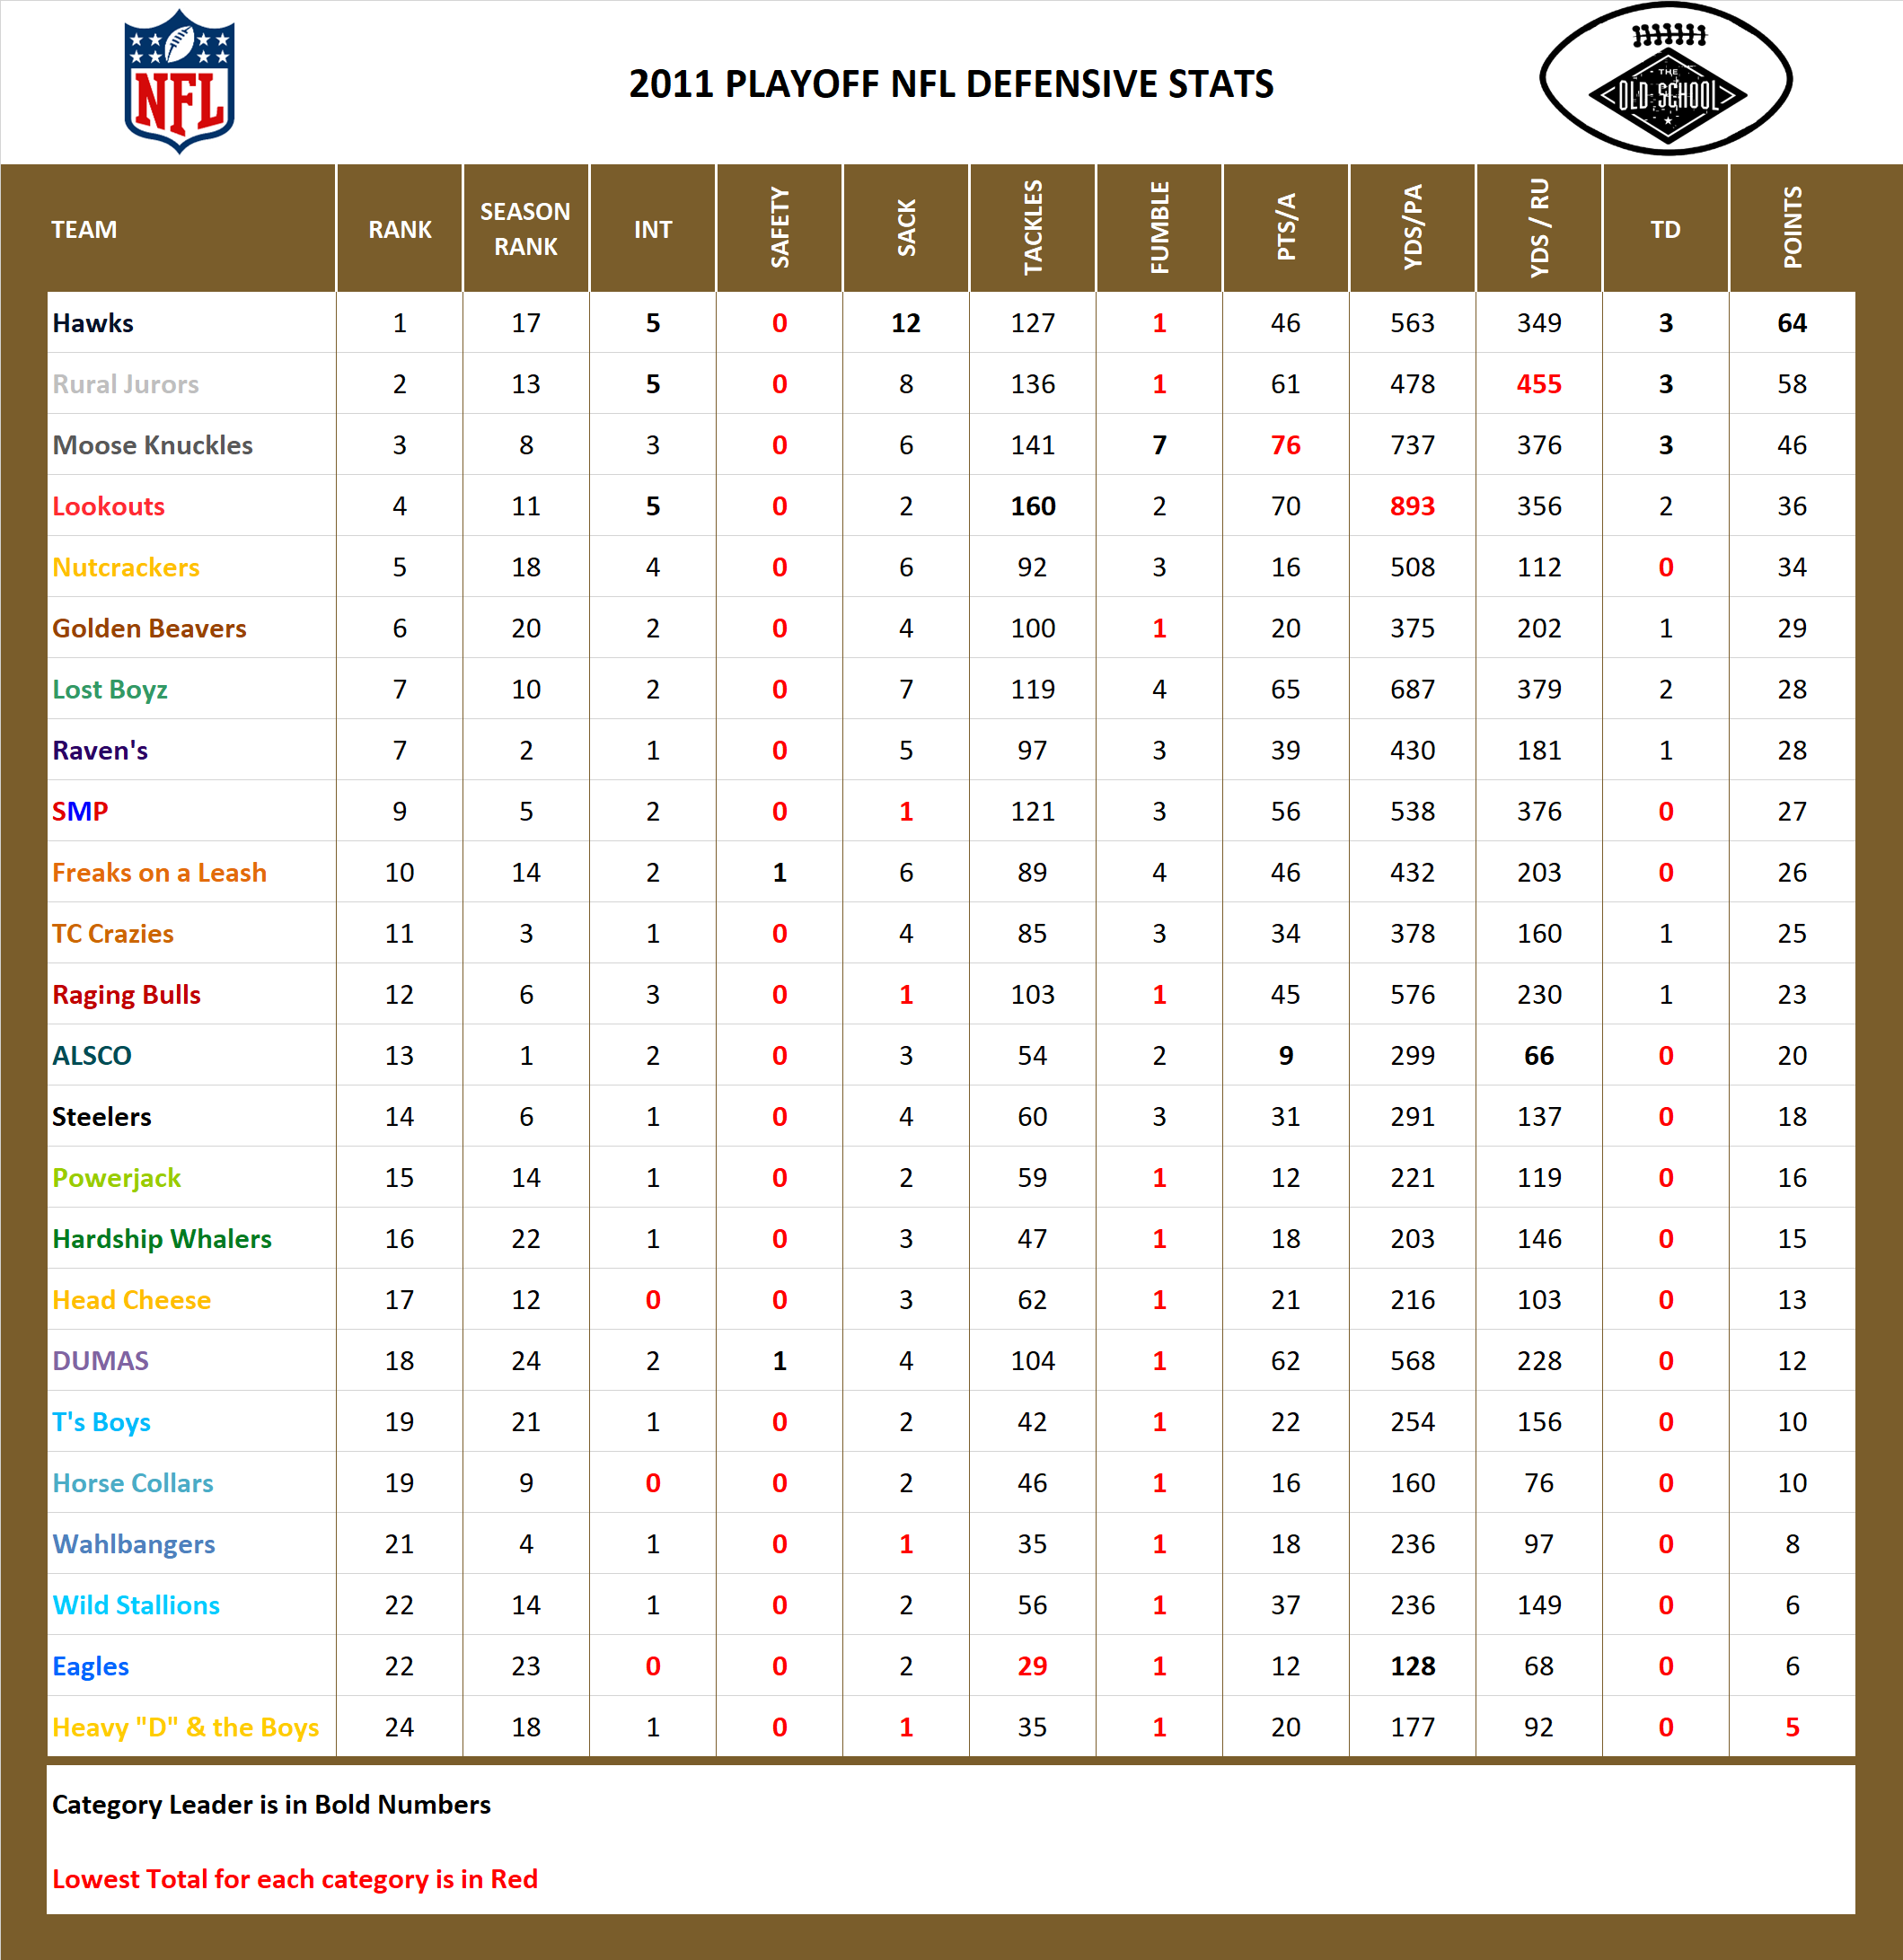 2011 National Football League Pool Playoff Defensive Stats